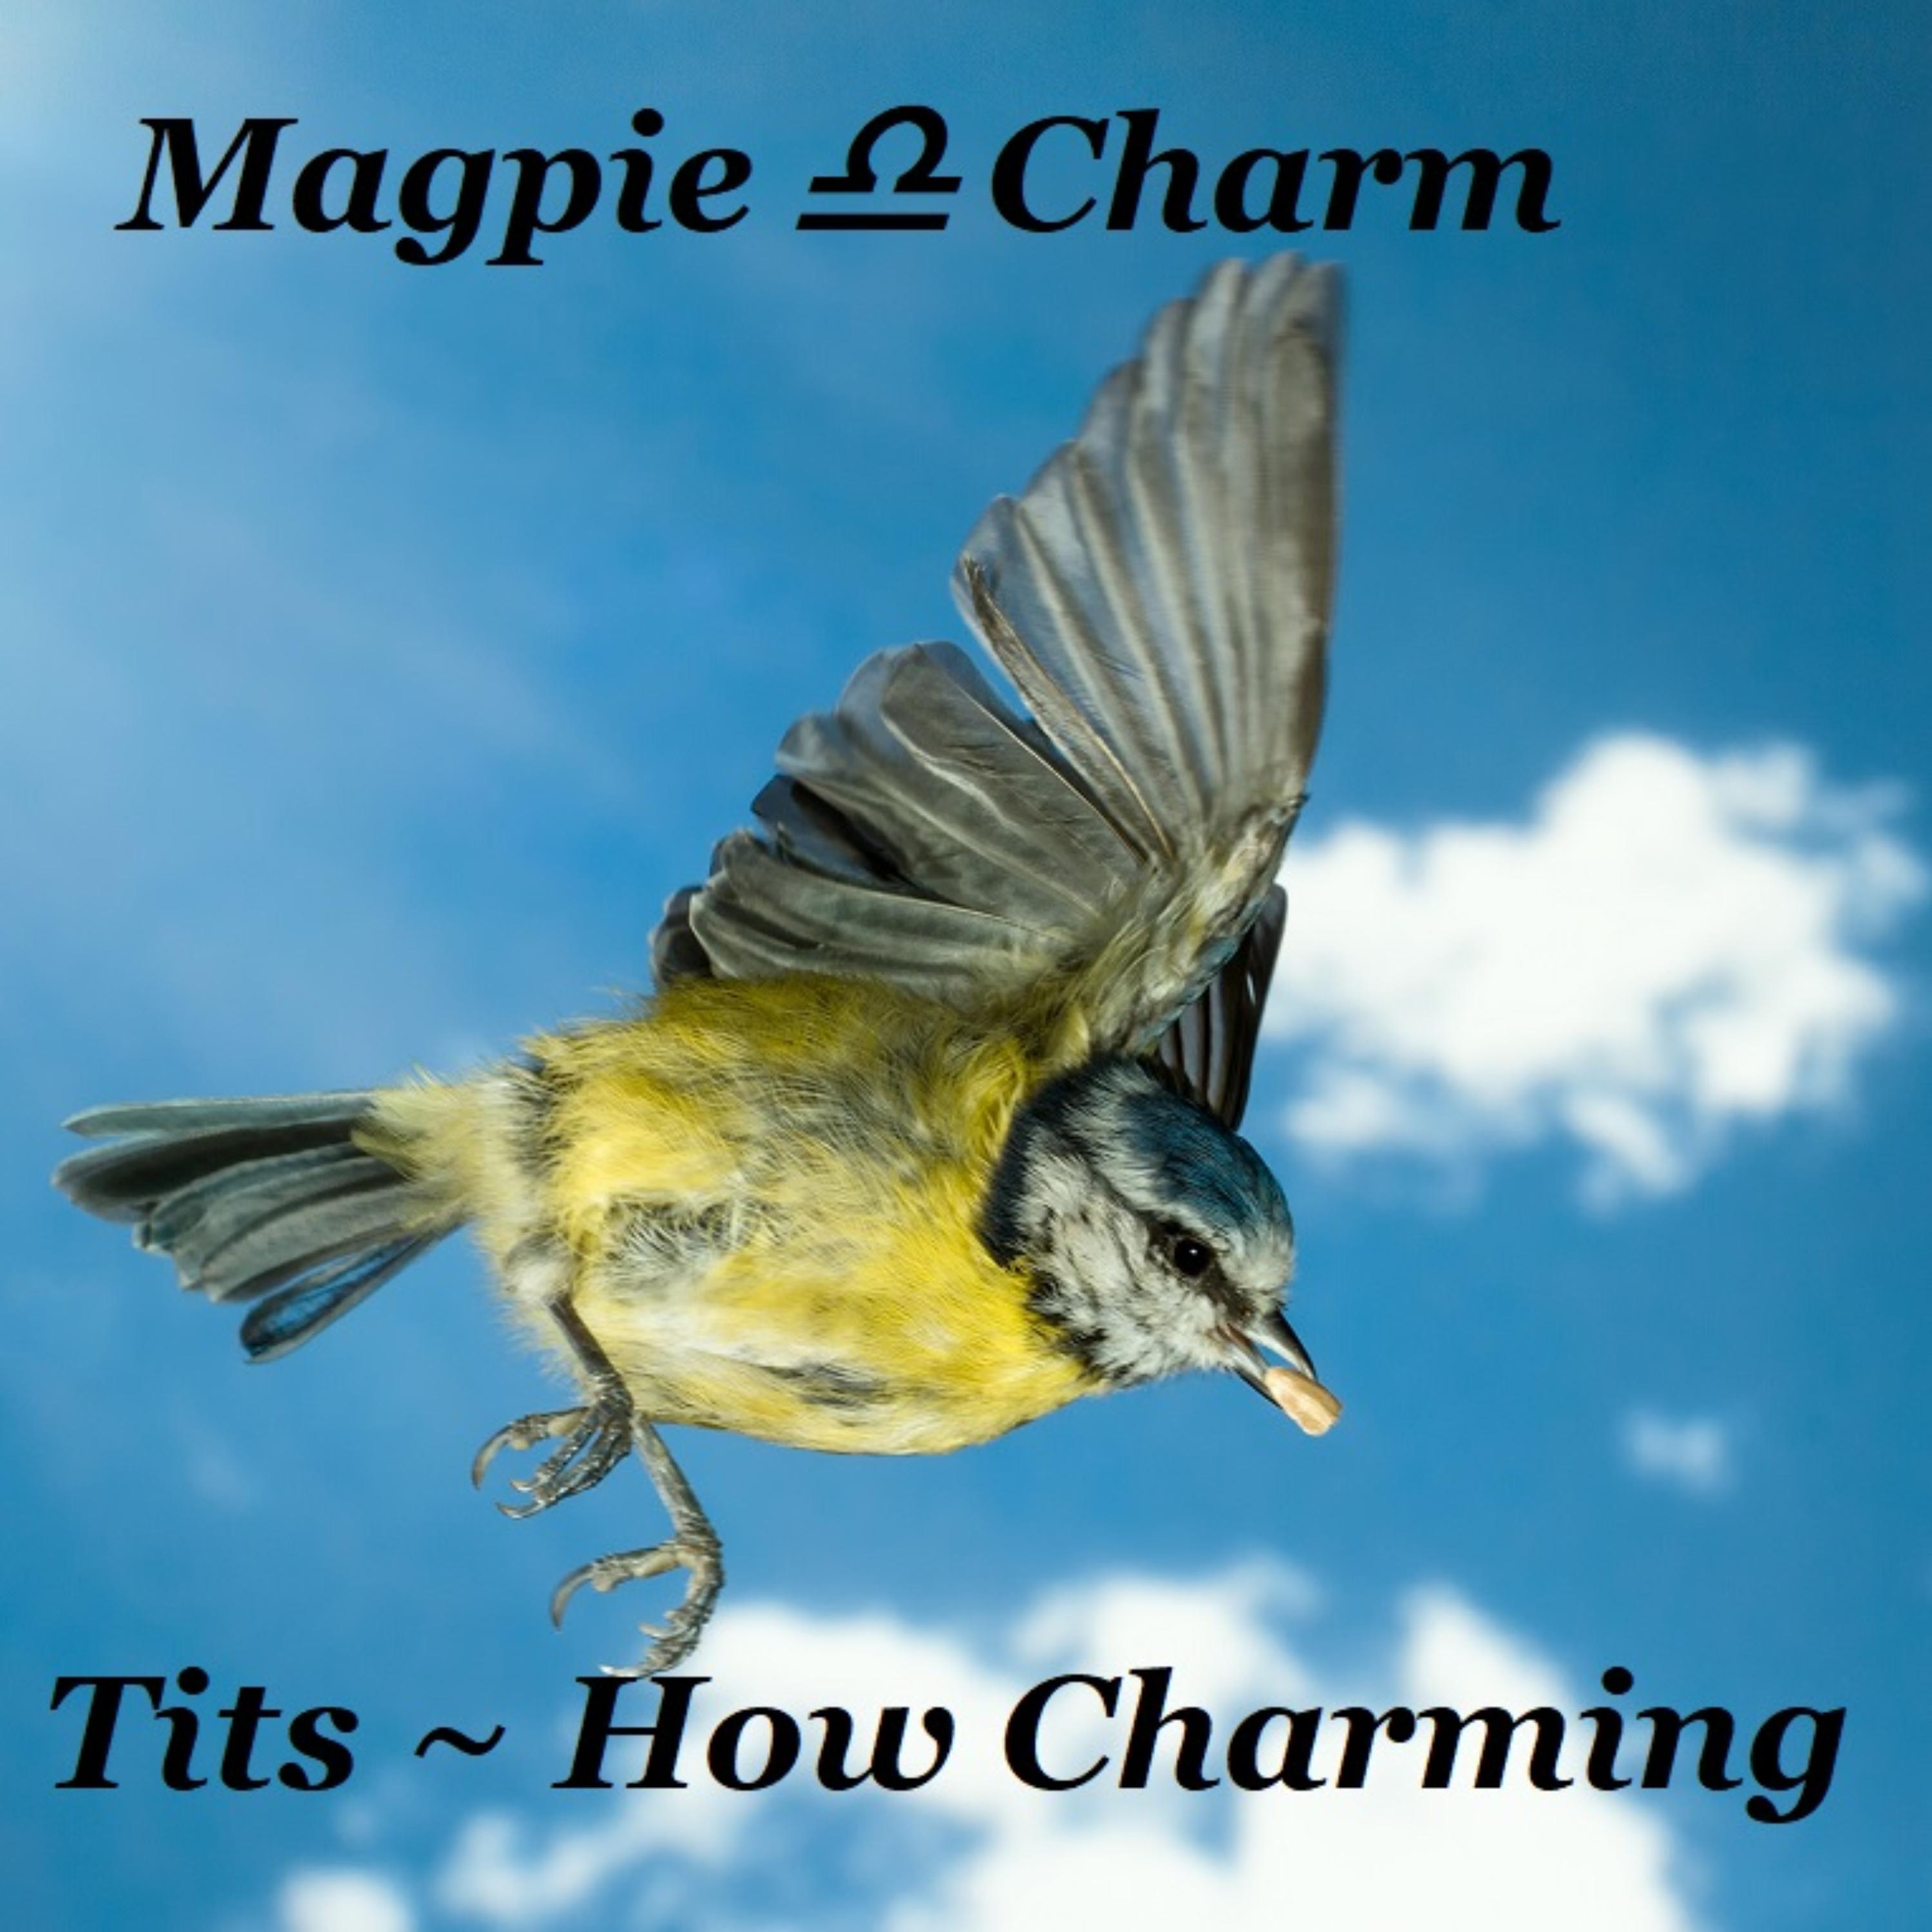 Tits - How Charming